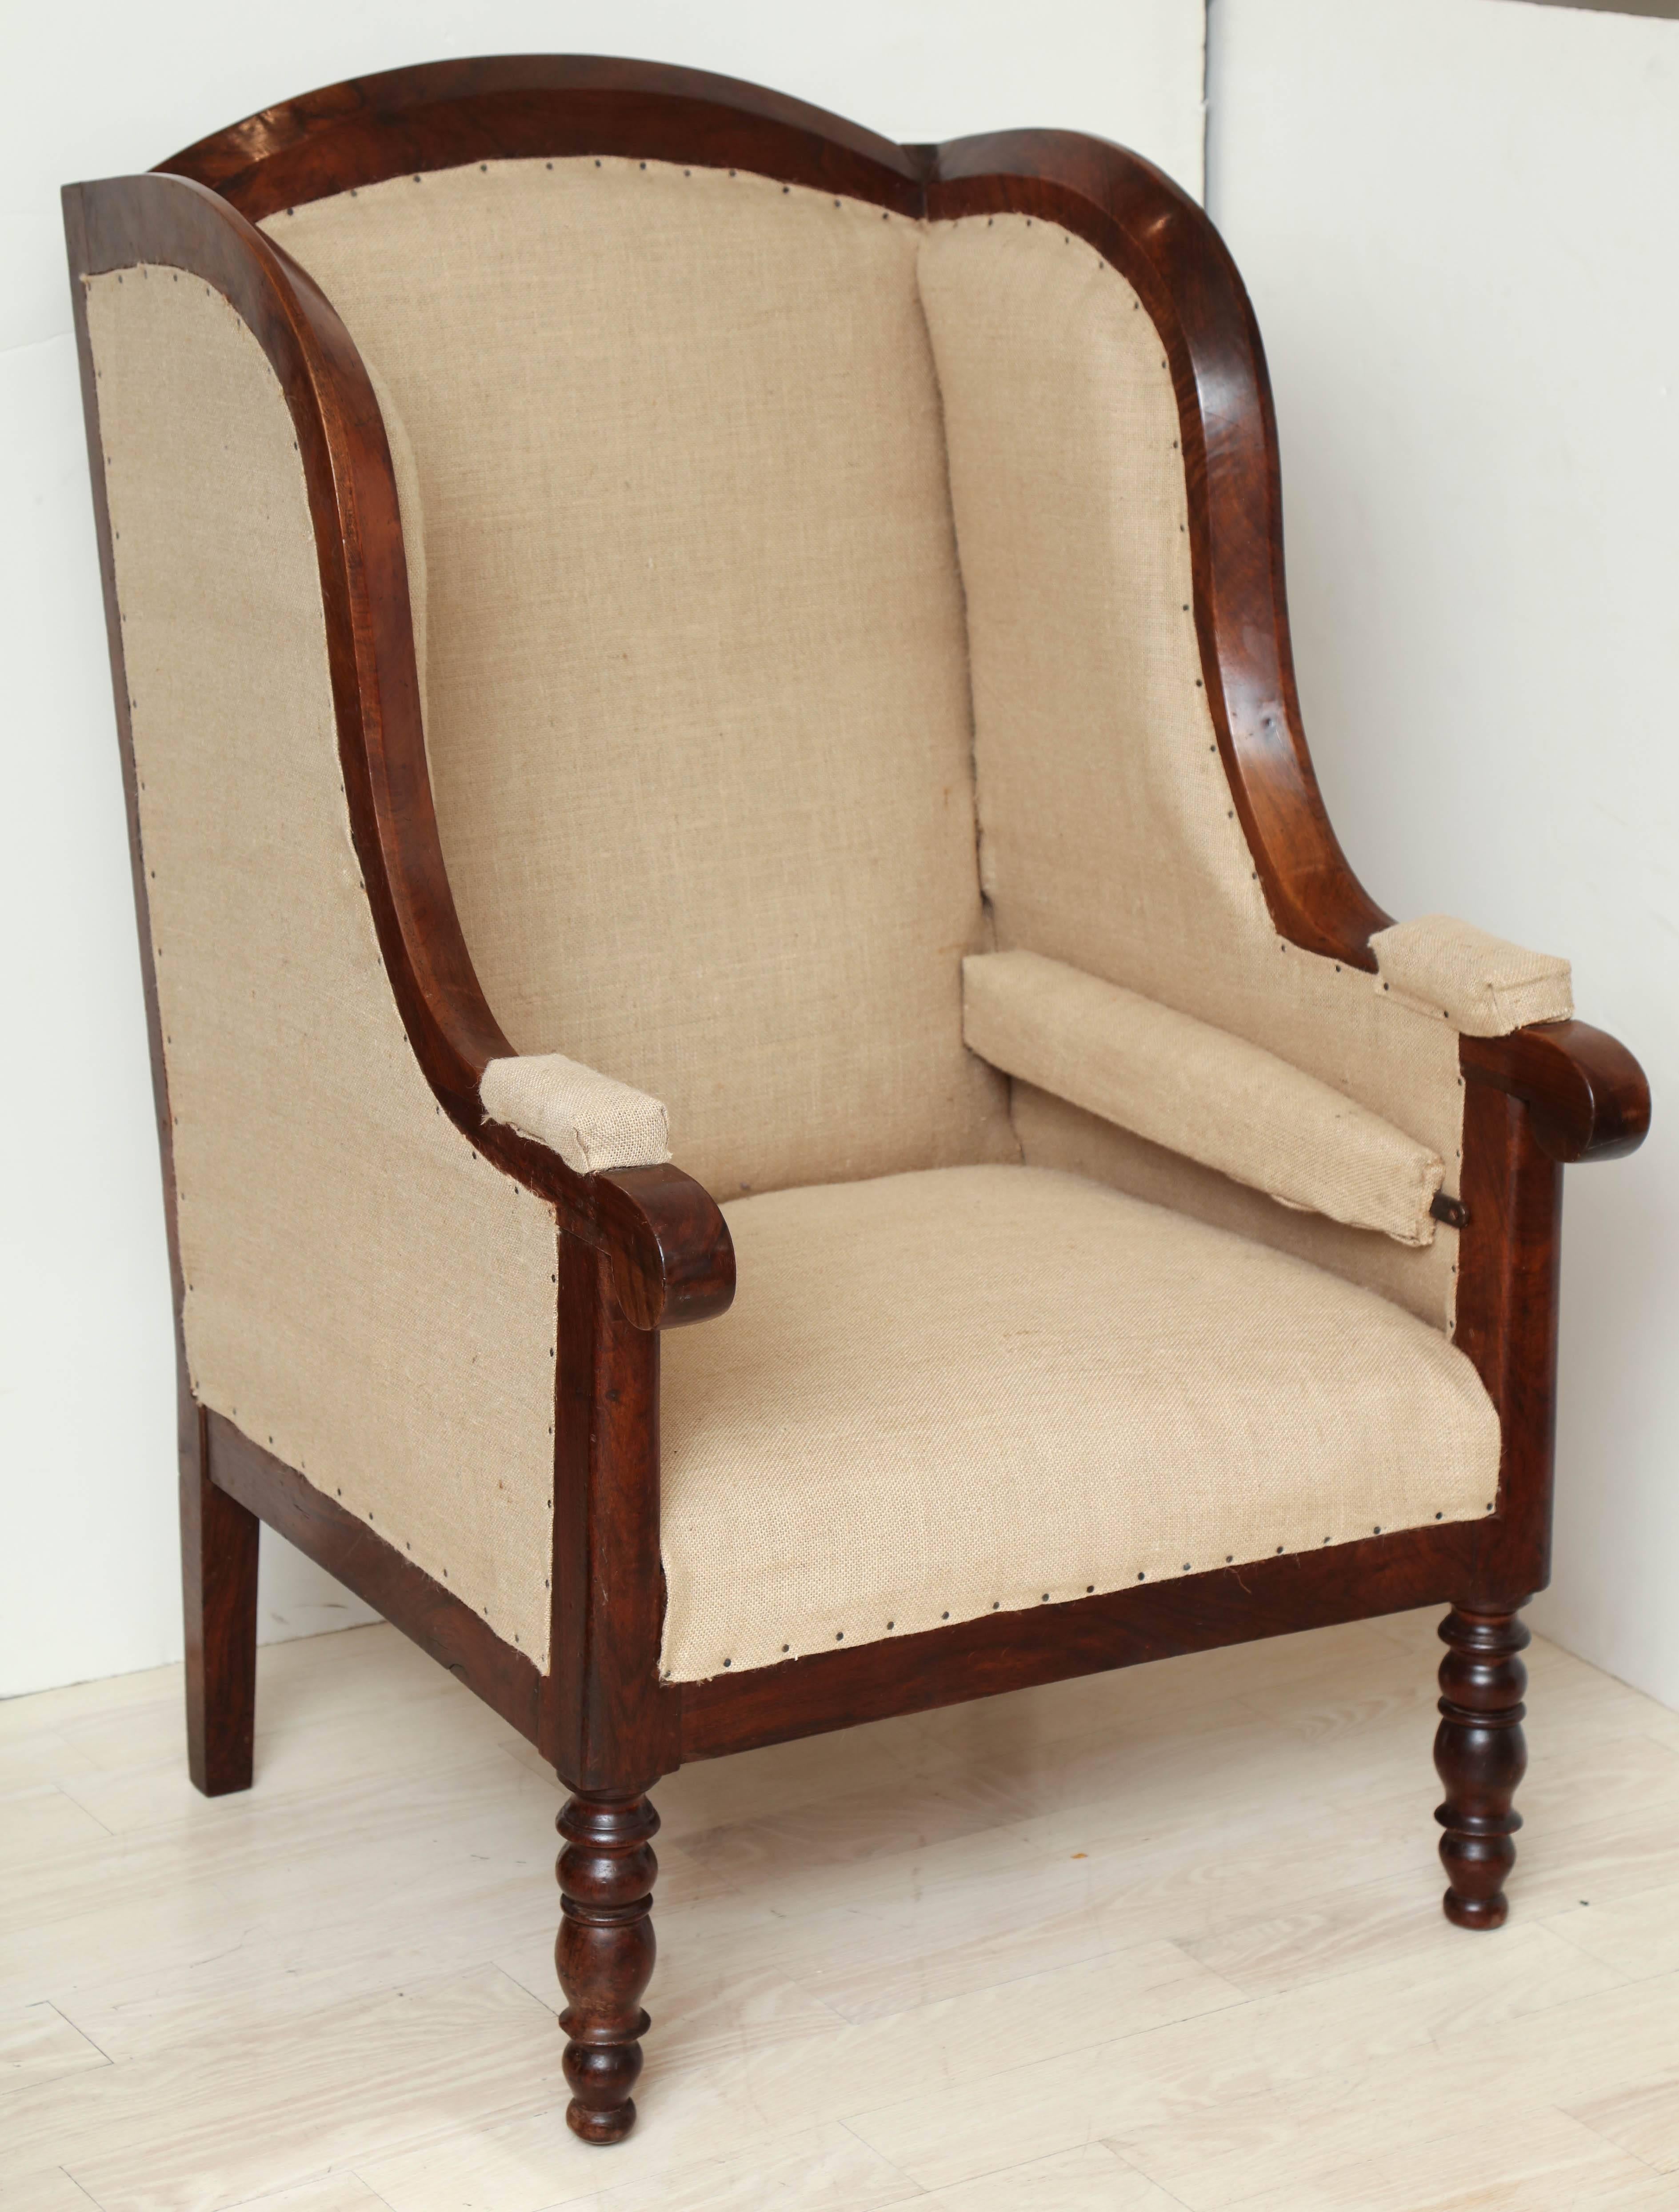 Upholstery Early 19th Century French Walnut Upholstered Wing Chair For Sale